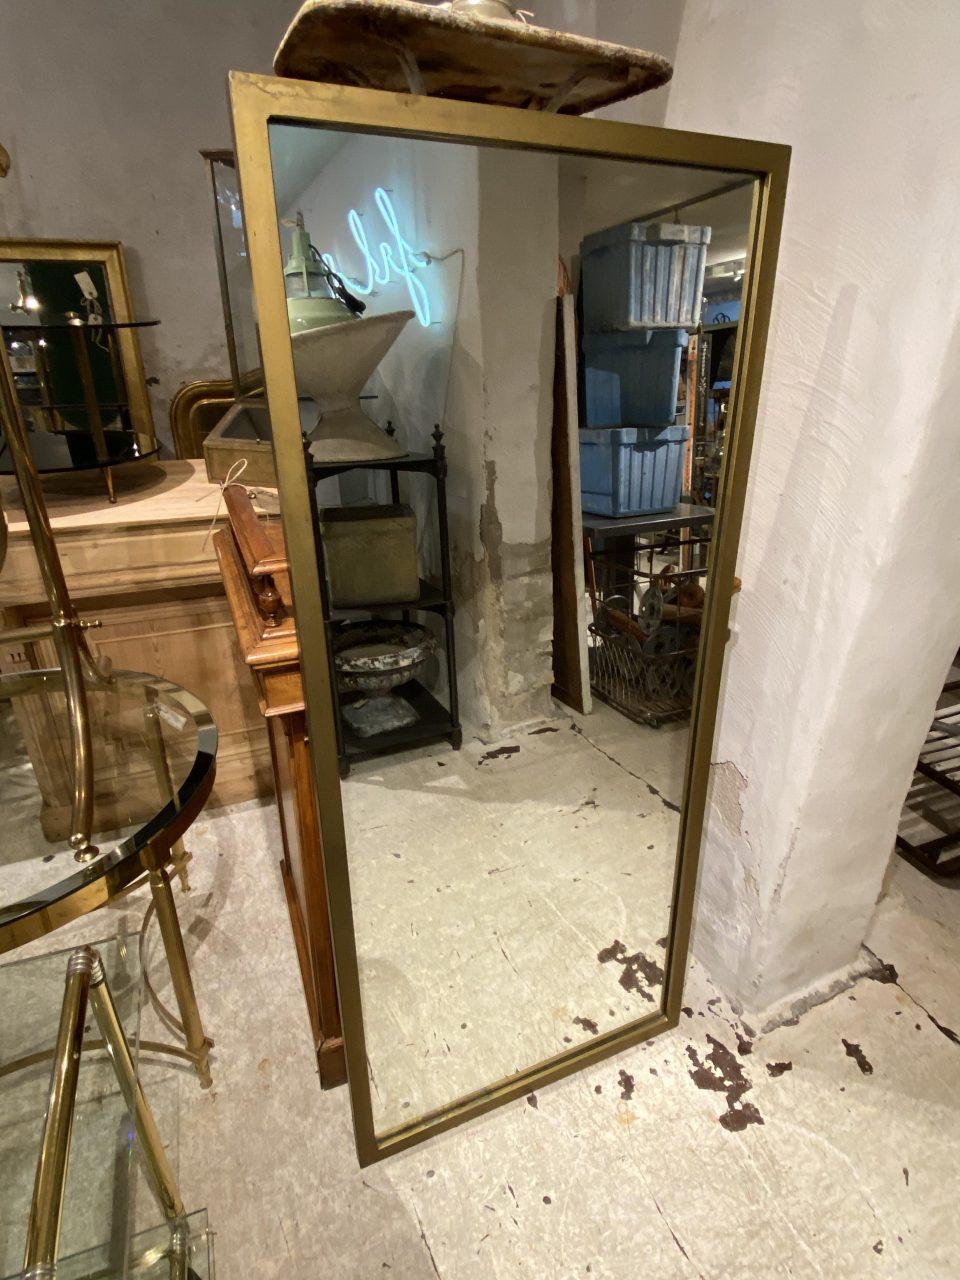 Minimalist and austerely handsome Italian figure mirror from the 1940s-50s, with original mirrored glass framed in a sleek rectangular wide metal frame and dark patinated gilded paint.

Ideal mirror for anywhere in your home, hallway or in a